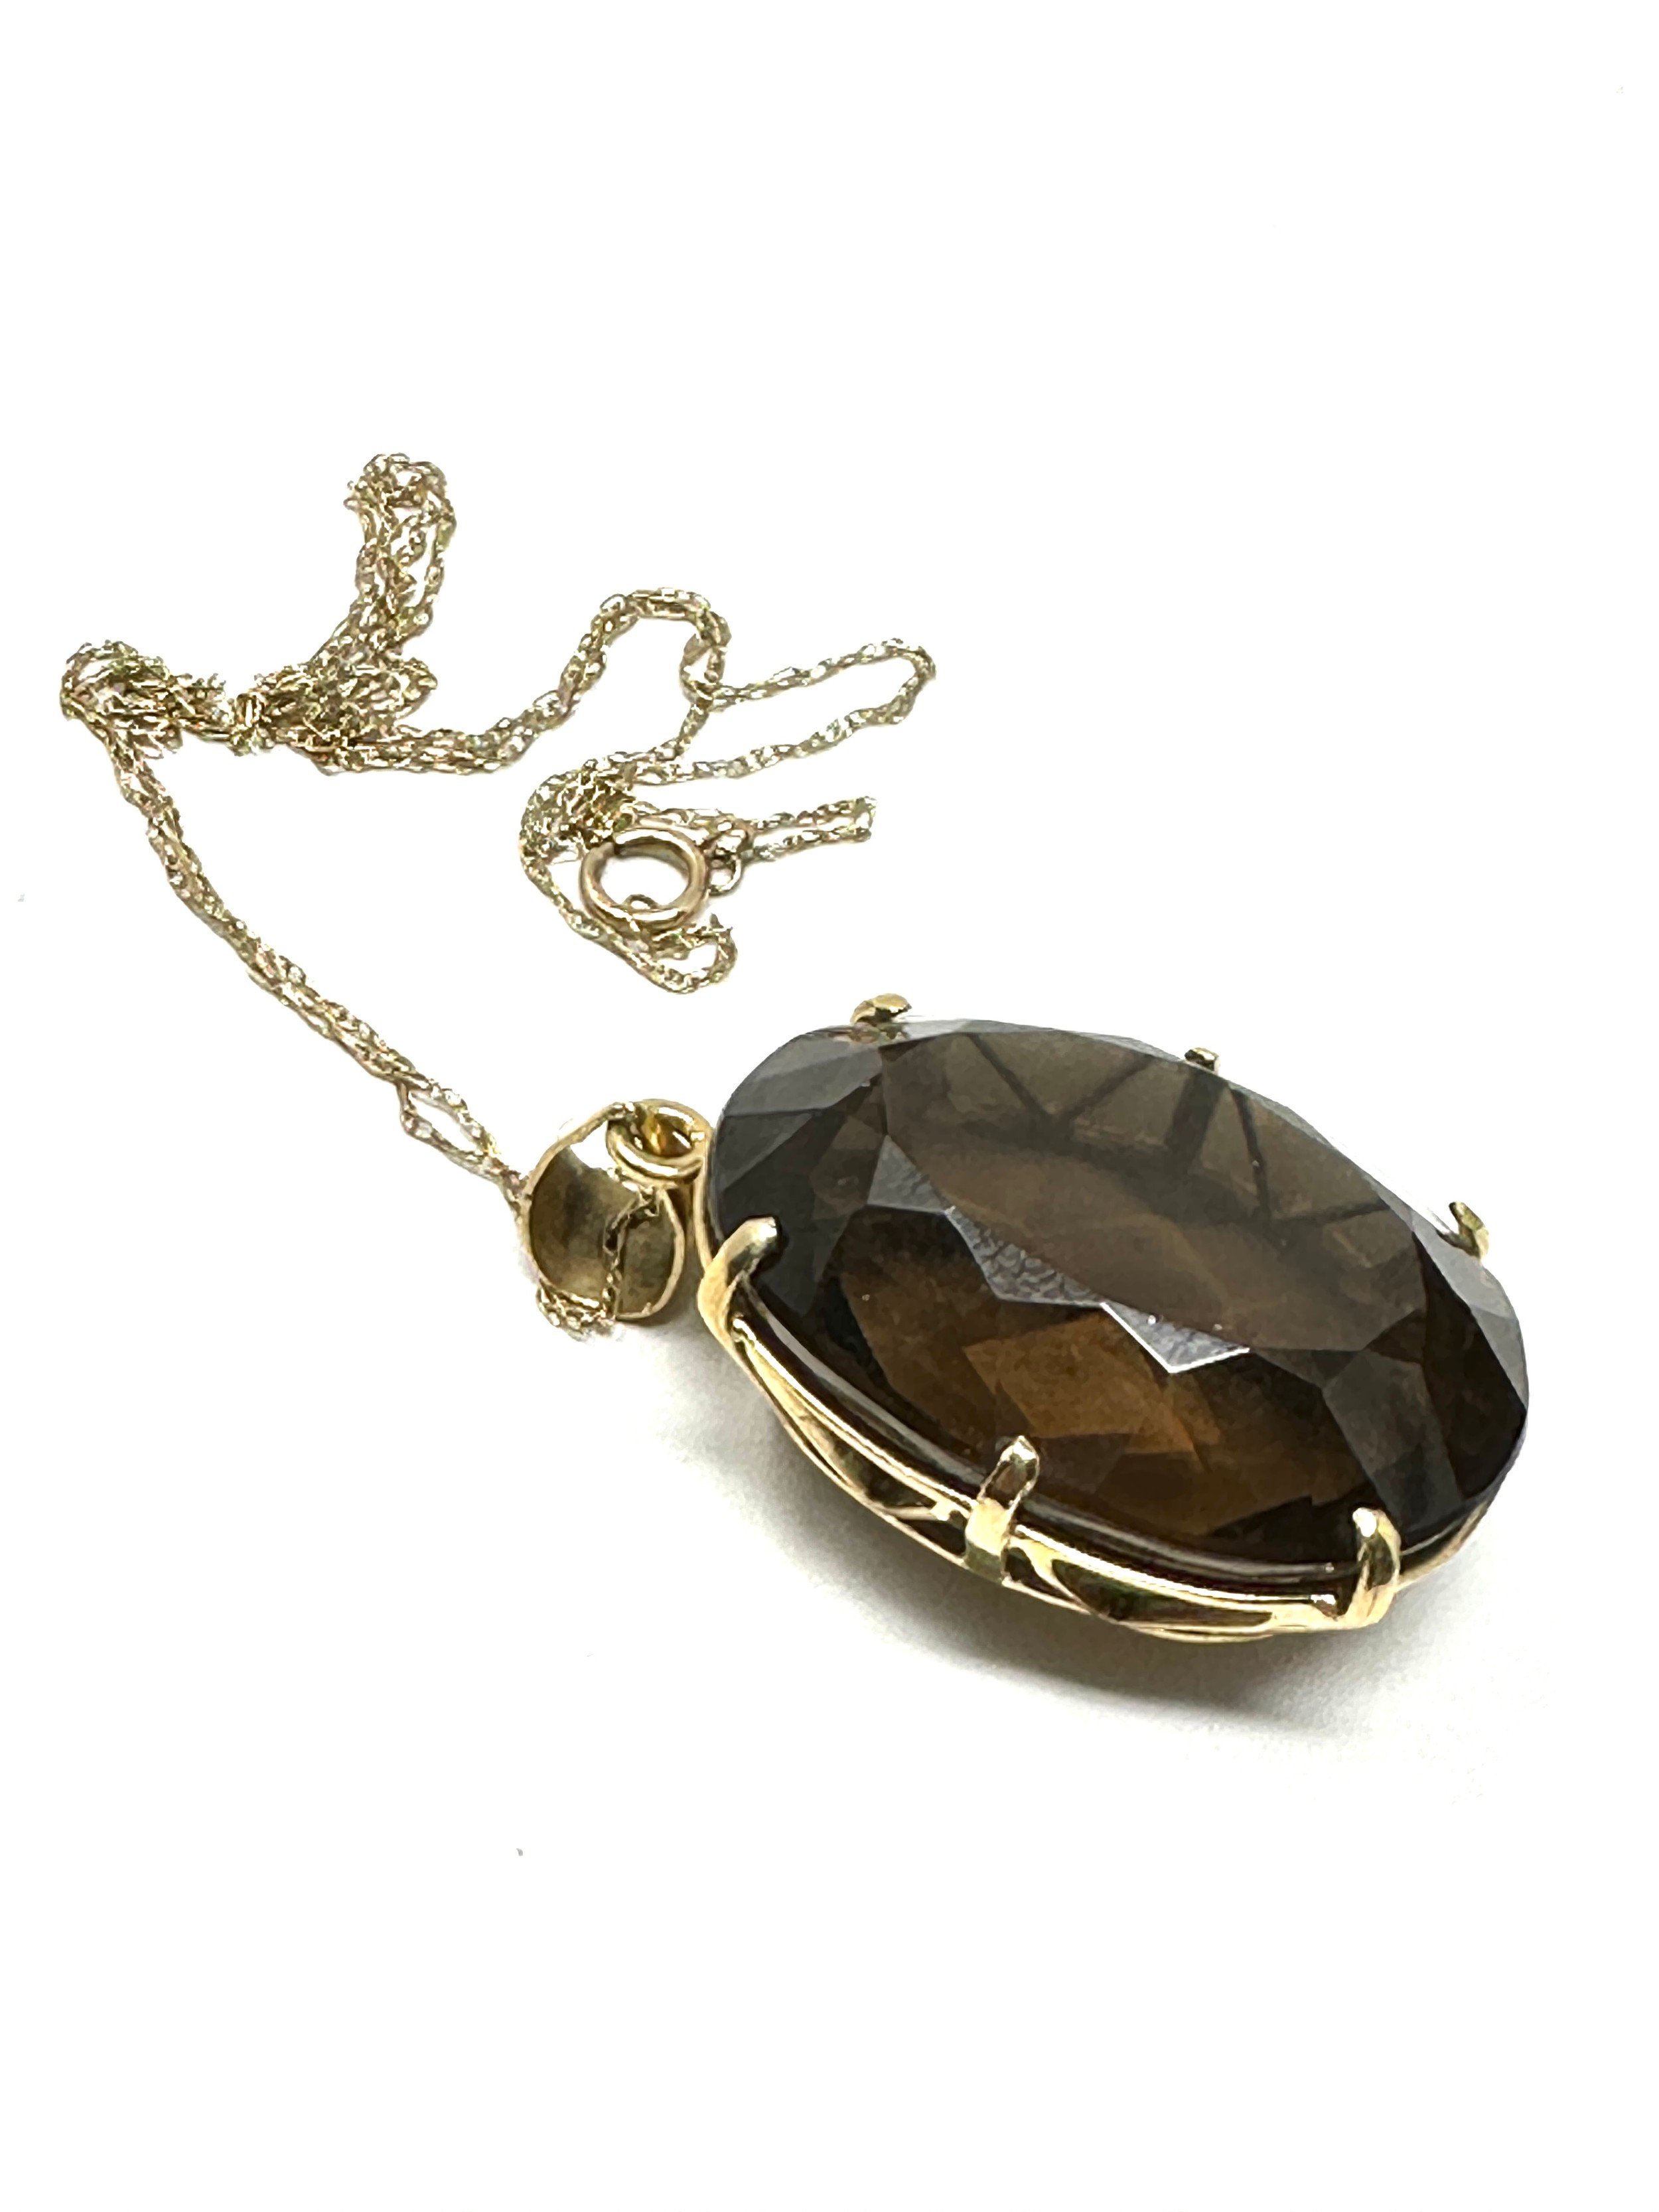 14ct gold smoky quartz pendant necklace with 9ct gold chain (21g)